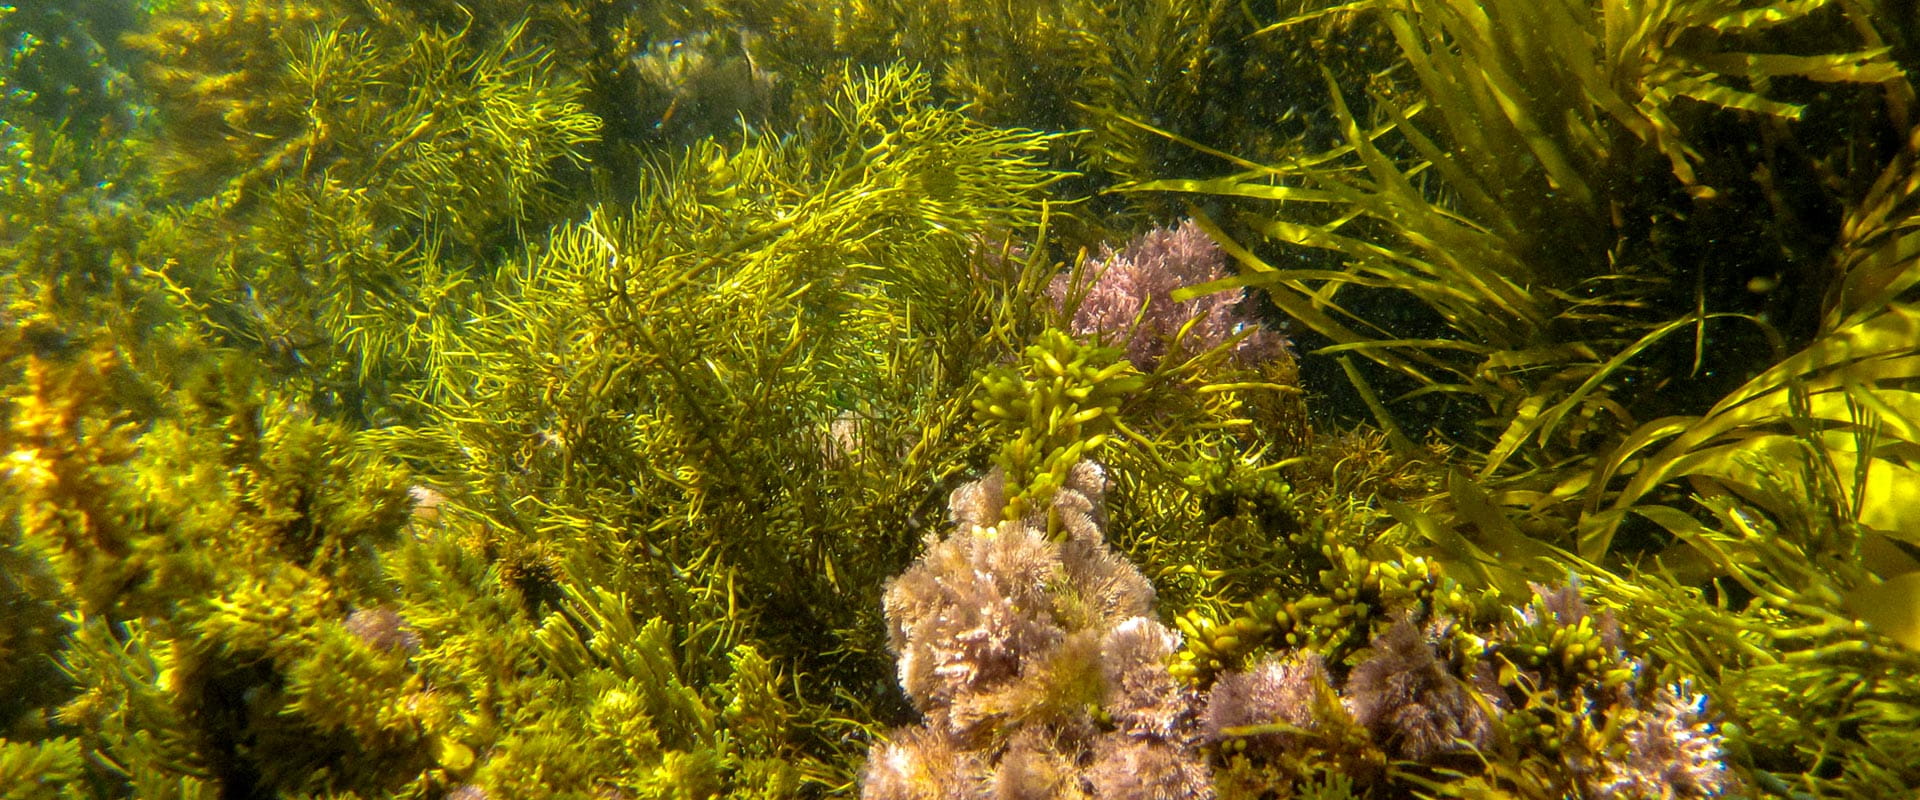 A healthy seabed covered in different plant varietes.